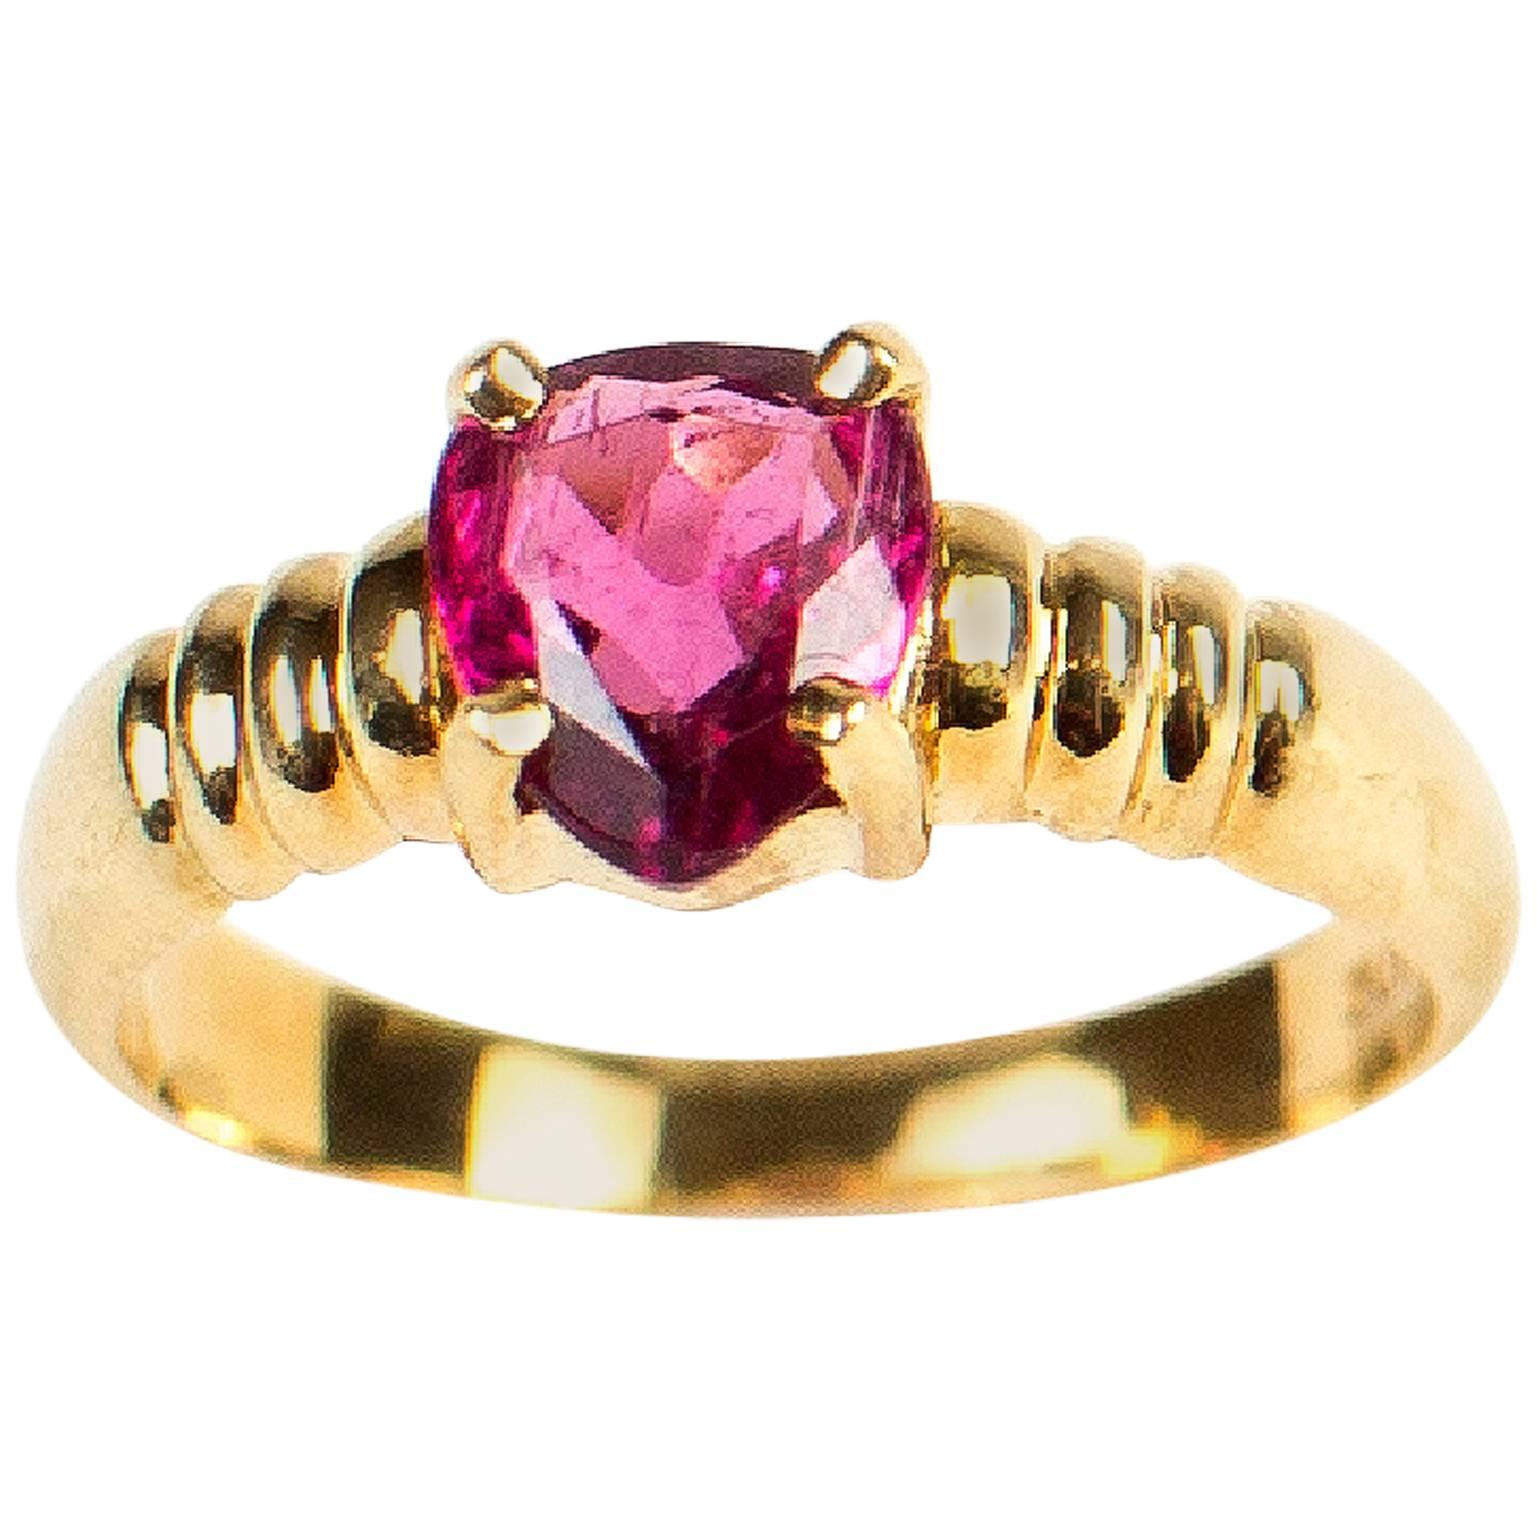 Lovely Pear shape (approximately 8x6mm) sparkling Brazilian Rubelite set a  Brazilian handmade18kt yellow gold ring.  The ring (shank)  itself has just the right amount of detail to enhance the rubelite and is of a nice weight.
Size 6.5.  
